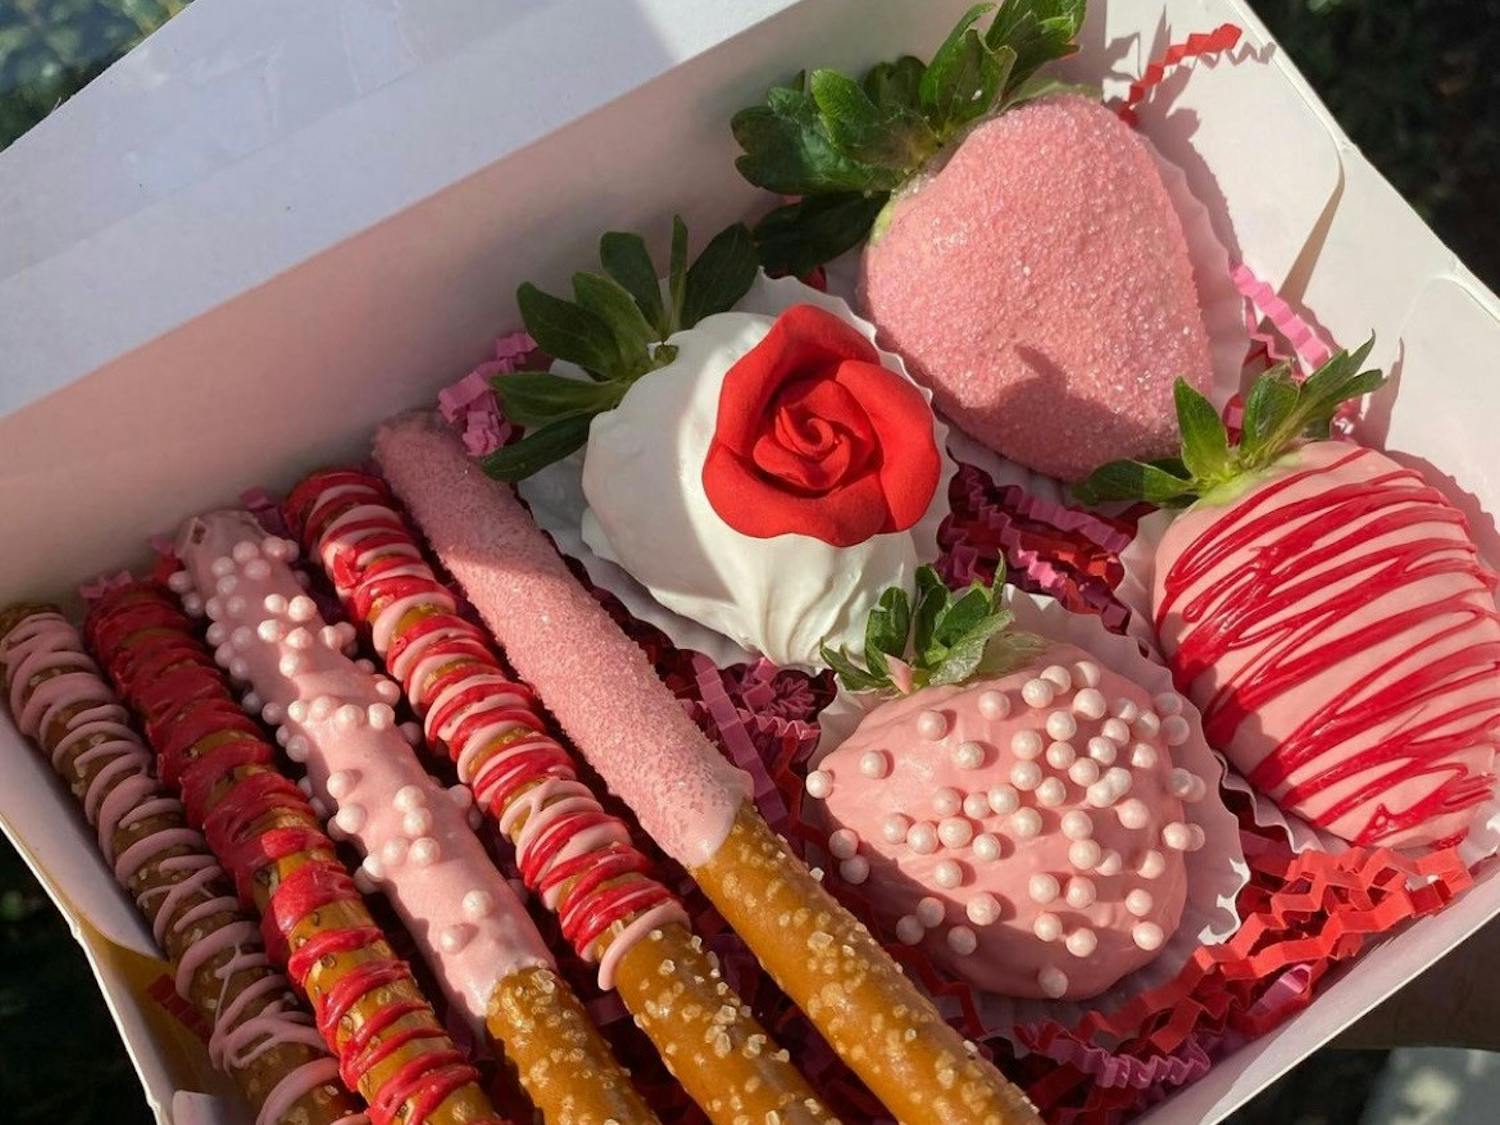 Three UF students founded Sister Sweets & Treats just in time for Valentine's Day.